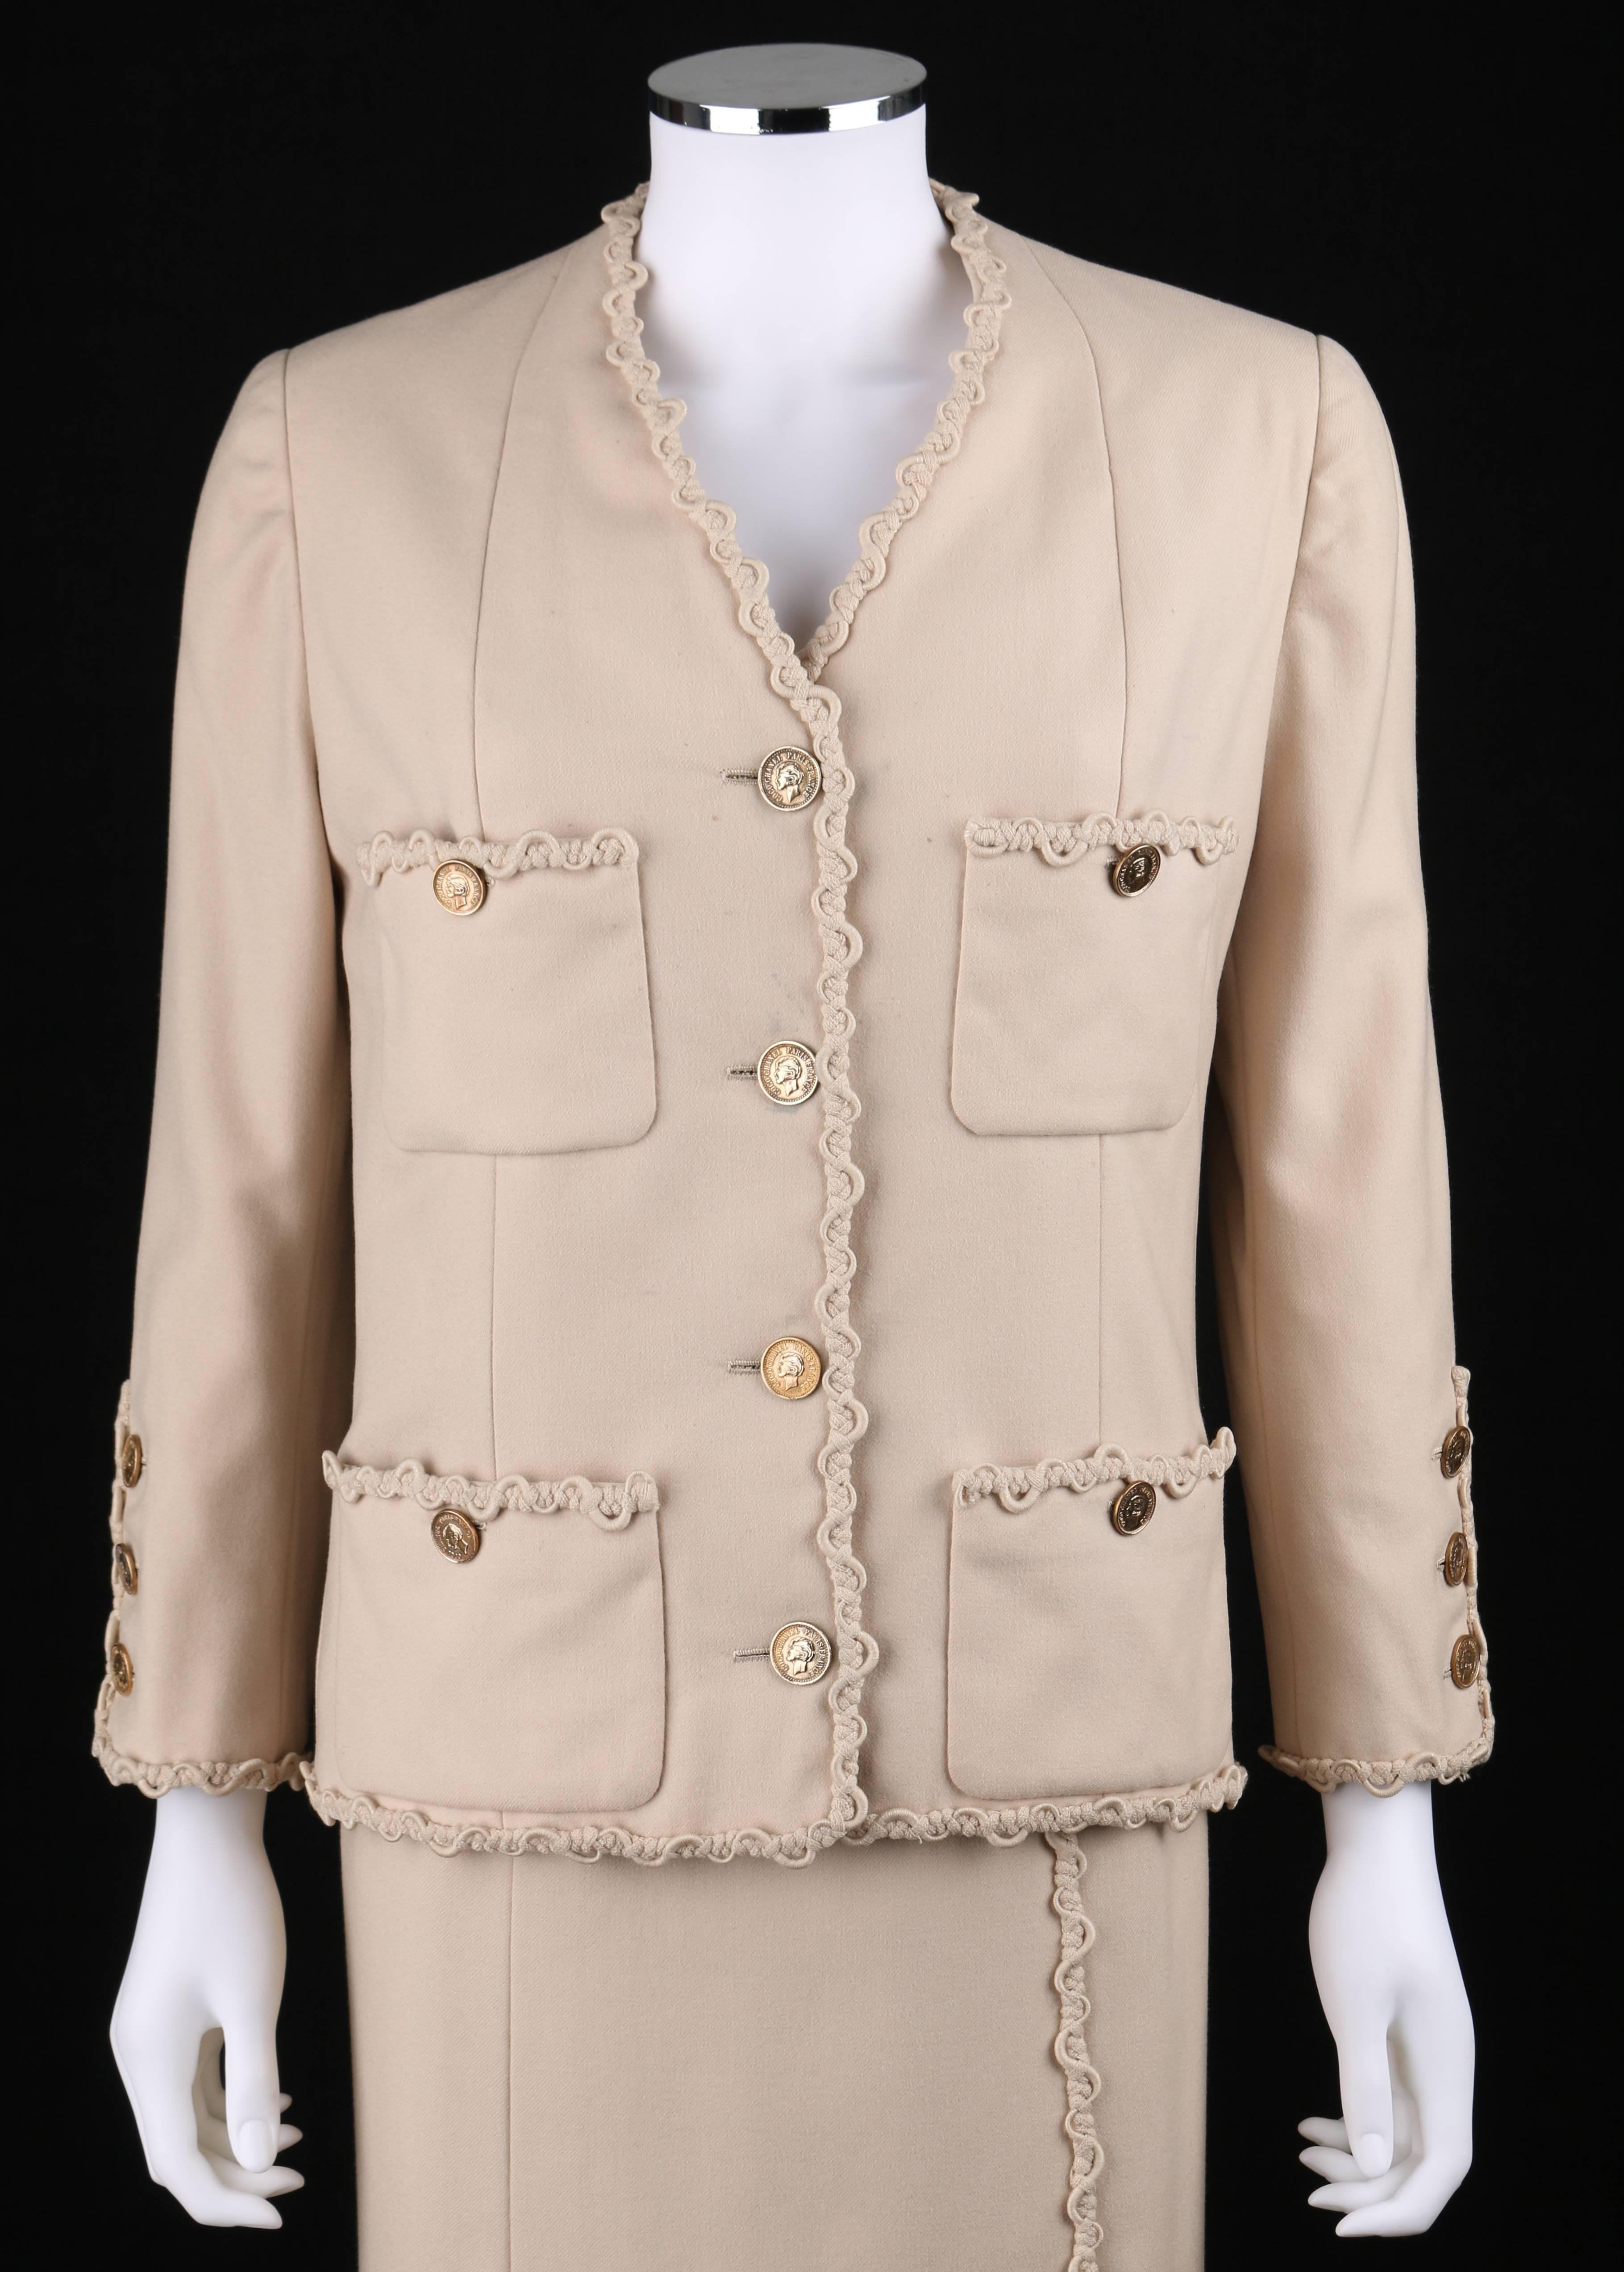 Vintage Chanel c.1980's Haute Couture numbered (64763 and 64764) beige wool skirt suit. Jacket has Coco Chanel portrait buttons. Four small pockets. Buttons at front and cuffs. Chain weighted hem. Skirt closes with zipper. Both pieces are fully